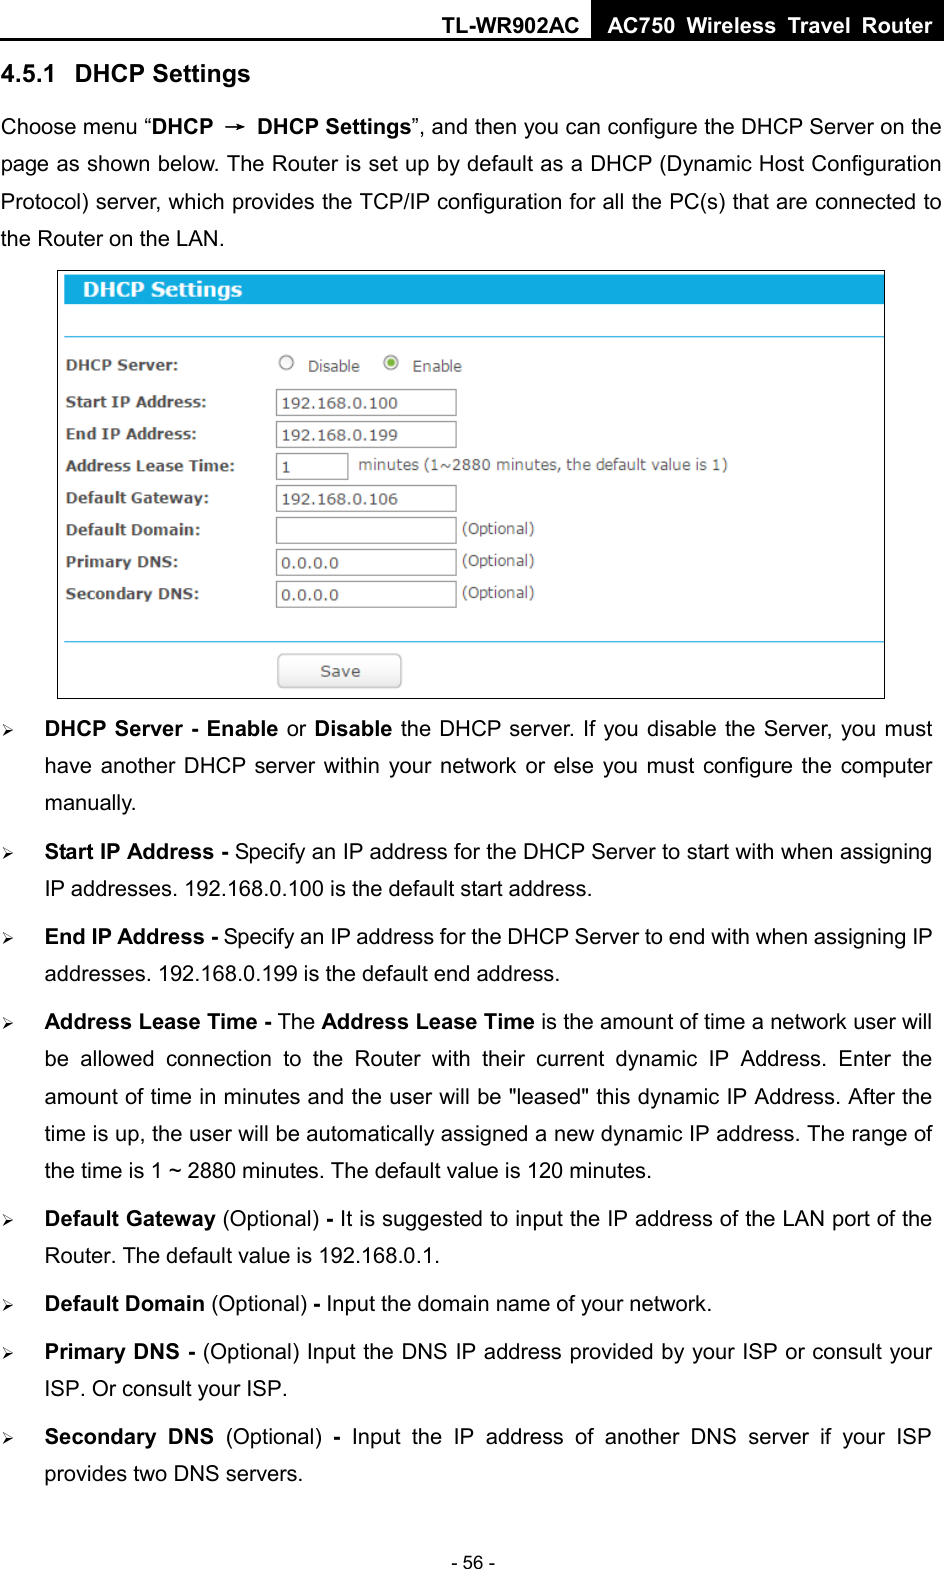 TL-WR902AC AC750  Wireless Travel Router  - 56 - 4.5.1 DHCP Settings Choose menu “DHCP → DHCP Settings”, and then you can configure the DHCP Server on the page as shown below. The Router is set up by default as a DHCP (Dynamic Host Configuration Protocol) server, which provides the TCP/IP configuration for all the PC(s) that are connected to the Router on the LAN.     DHCP Server - Enable or Disable the DHCP server. If you disable the Server, you must have another DHCP server within your network or else you must configure the computer manually.  Start IP Address - Specify an IP address for the DHCP Server to start with when assigning IP addresses. 192.168.0.100 is the default start address.  End IP Address - Specify an IP address for the DHCP Server to end with when assigning IP addresses. 192.168.0.199 is the default end address.  Address Lease Time - The Address Lease Time is the amount of time a network user will be allowed connection to the Router with their current dynamic IP Address. Enter the amount of time in minutes and the user will be &quot;leased&quot; this dynamic IP Address. After the time is up, the user will be automatically assigned a new dynamic IP address. The range of the time is 1 ~ 2880 minutes. The default value is 120 minutes.  Default Gateway (Optional) - It is suggested to input the IP address of the LAN port of the Router. The default value is 192.168.0.1.  Default Domain (Optional) - Input the domain name of your network.  Primary DNS - (Optional) Input the DNS IP address provided by your ISP or consult your ISP. Or consult your ISP.  Secondary DNS (Optional)  -  Input the IP address of another DNS server if  your ISP provides two DNS servers. 